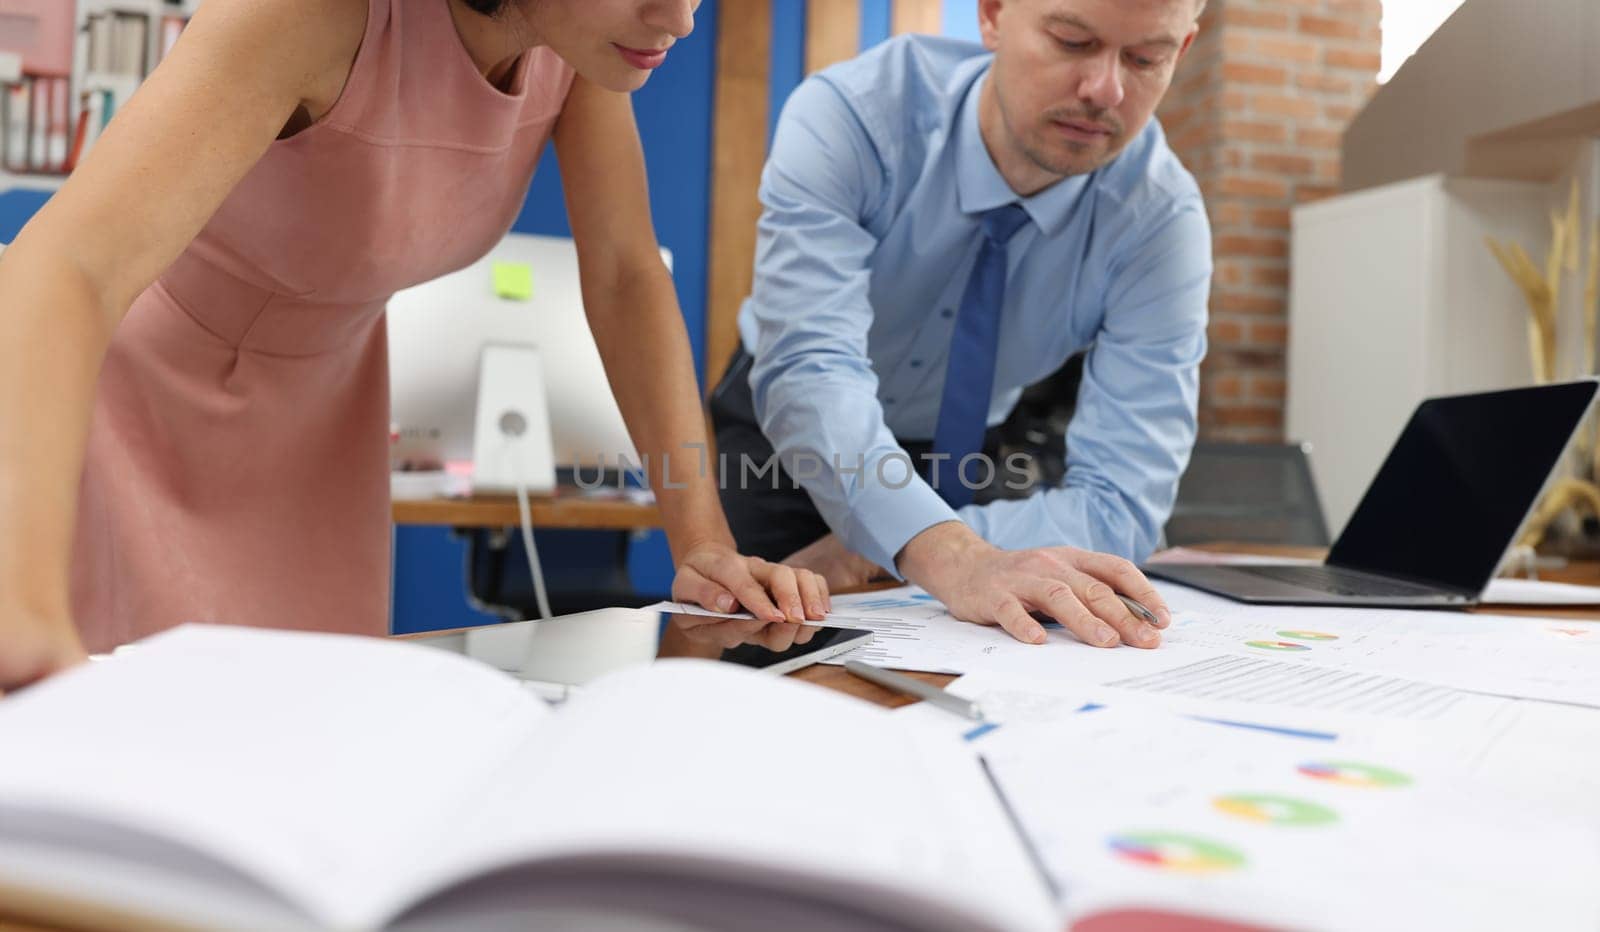 Business man and woman studying documents at table in office closeup by kuprevich